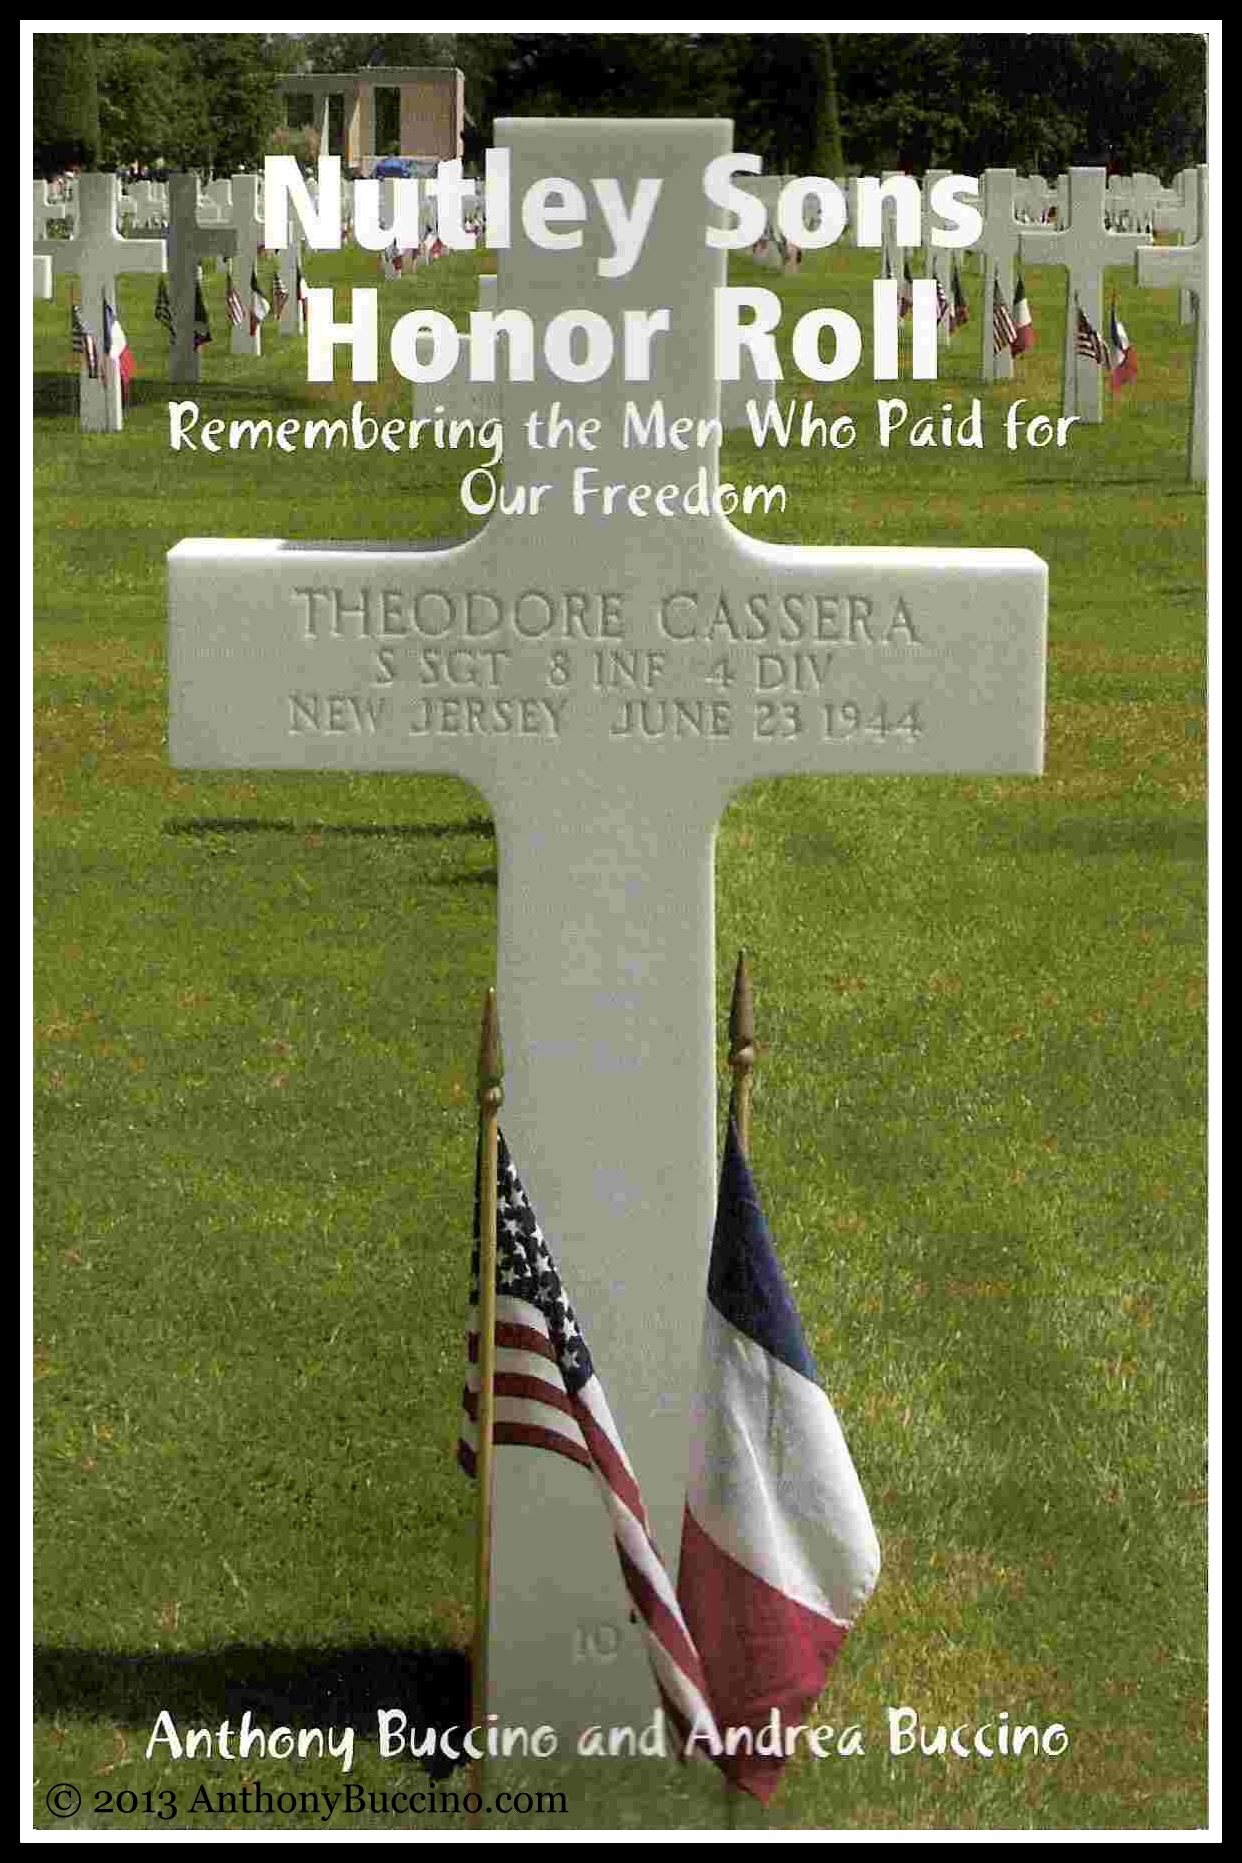 Nutley Sons Honor Roll - Remembering the Men Who Paid for our Freedom